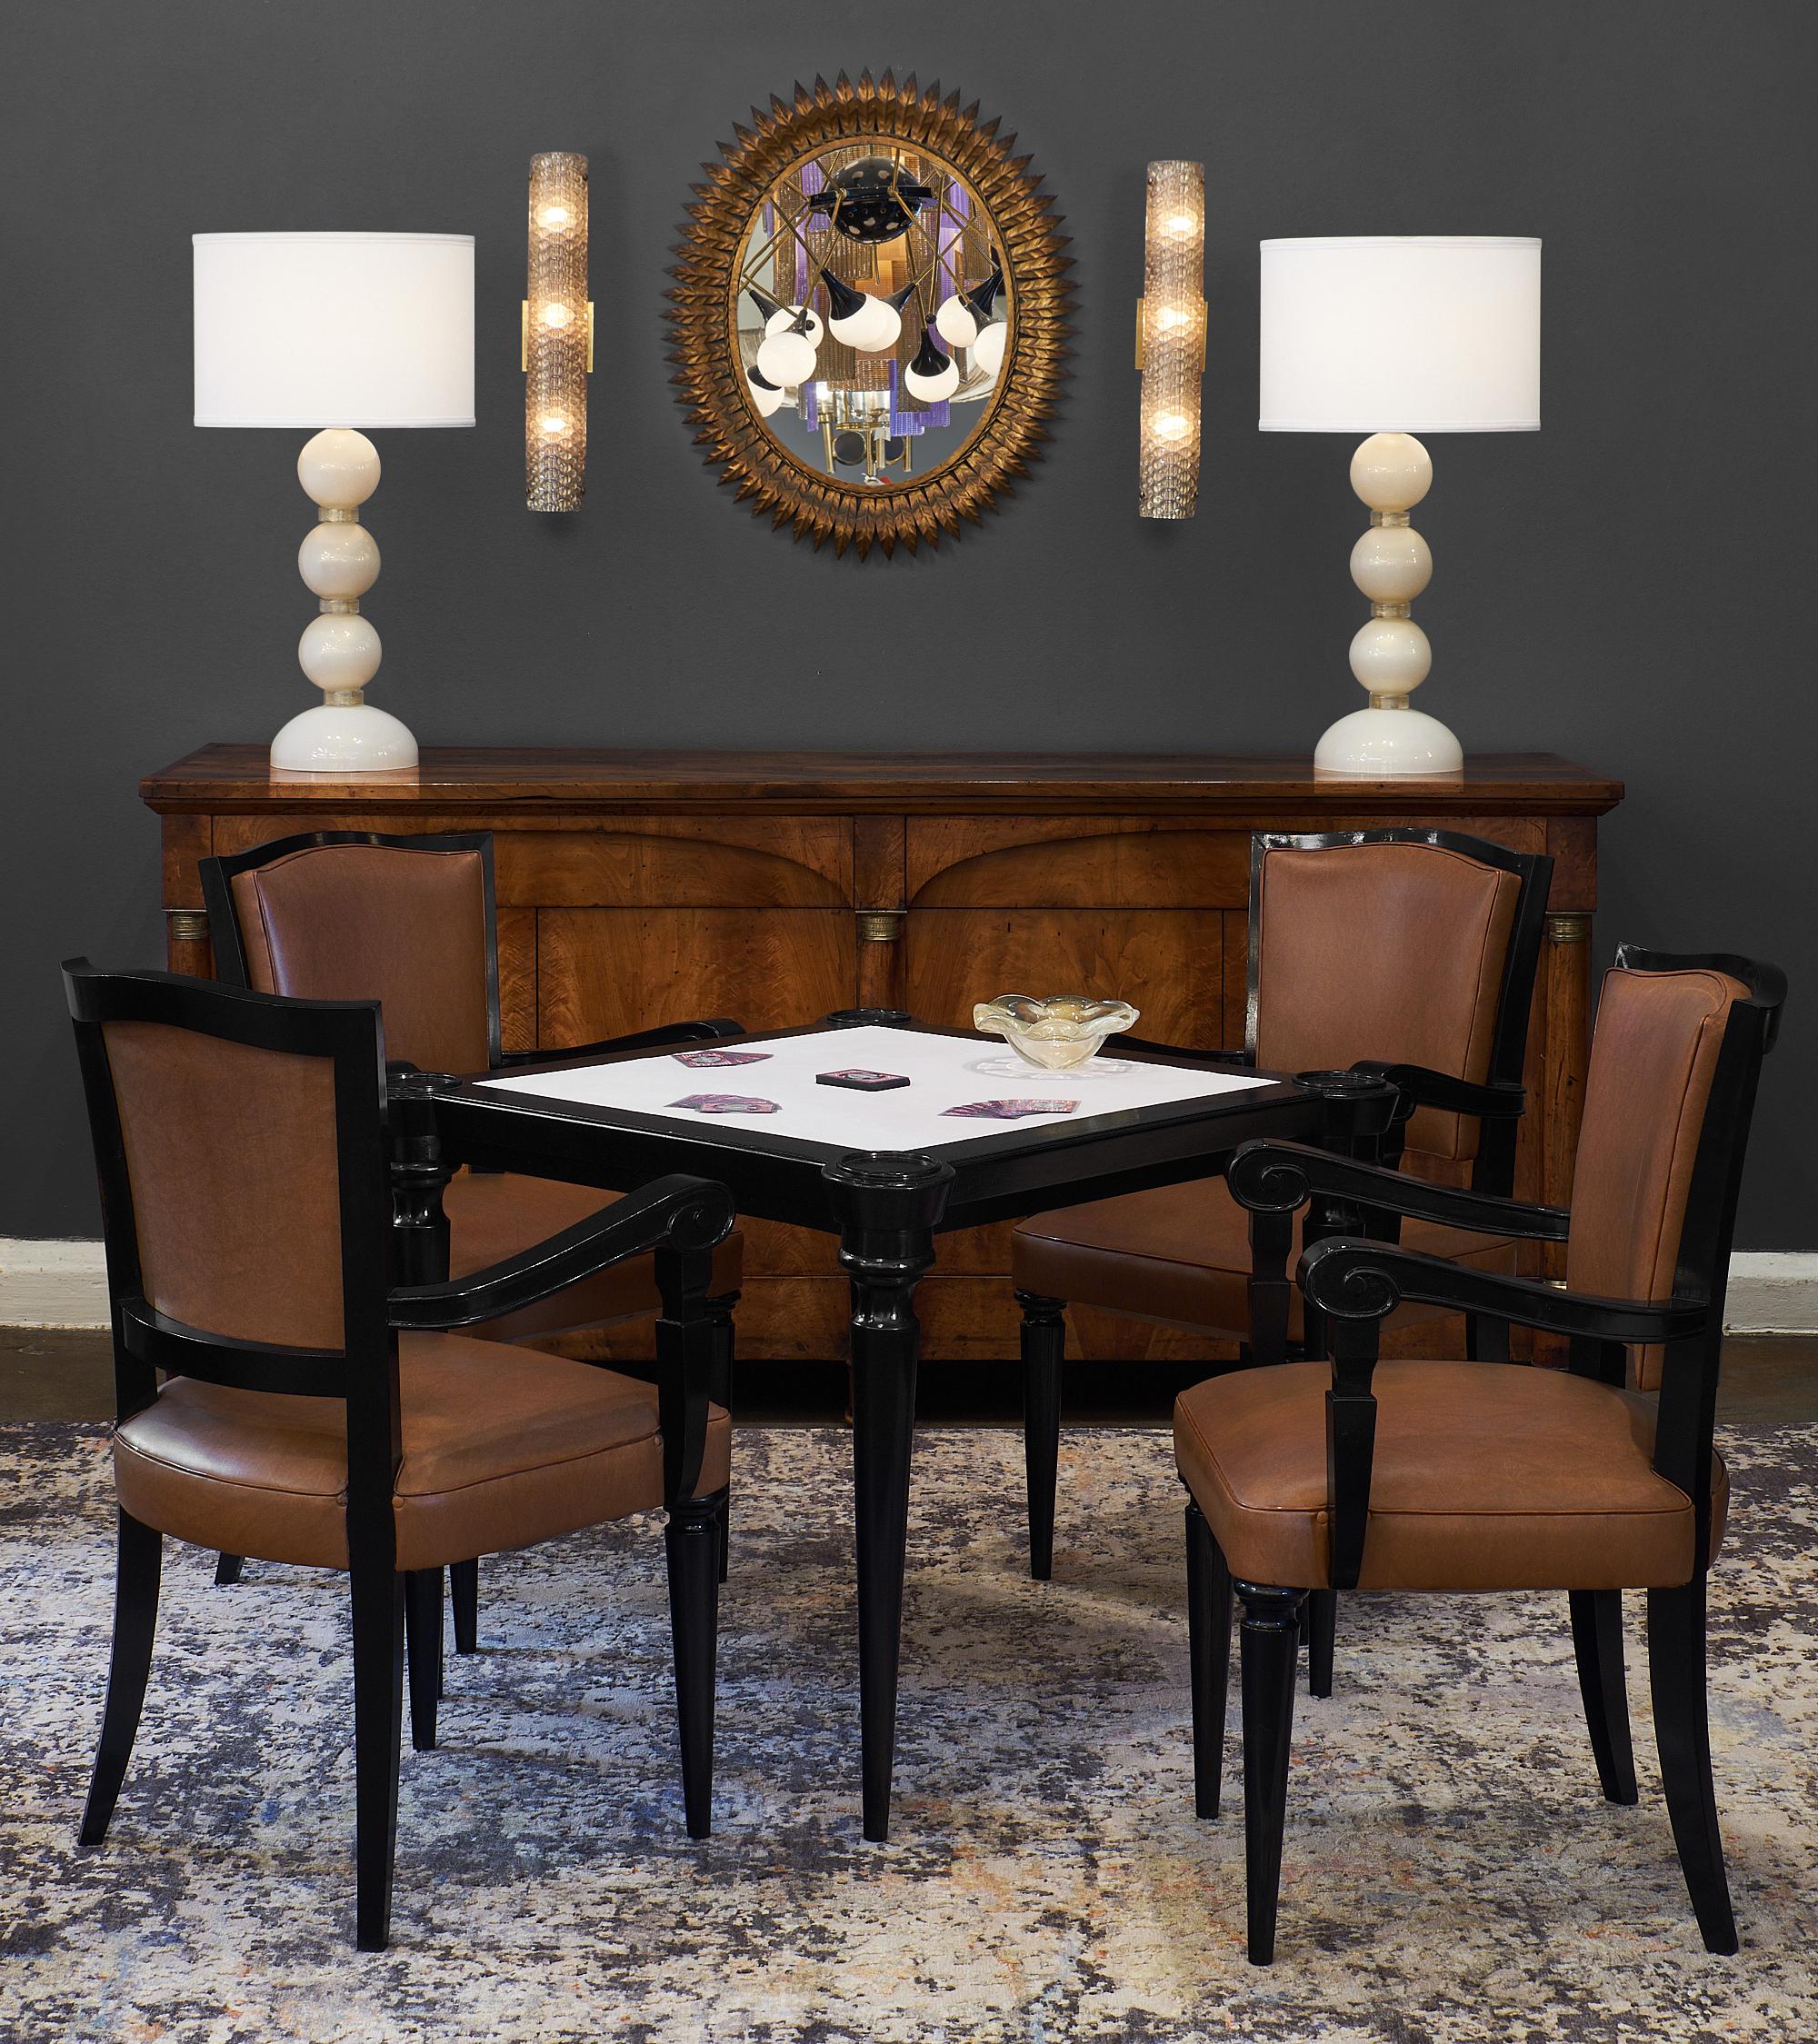 Art Deco period French game chairs made of ebonized walnut finished with a lustrous French polish. The chairs are upholstered with the original brown vinyl, in excellent vintage condition. We love the detail and strength of this set. The table